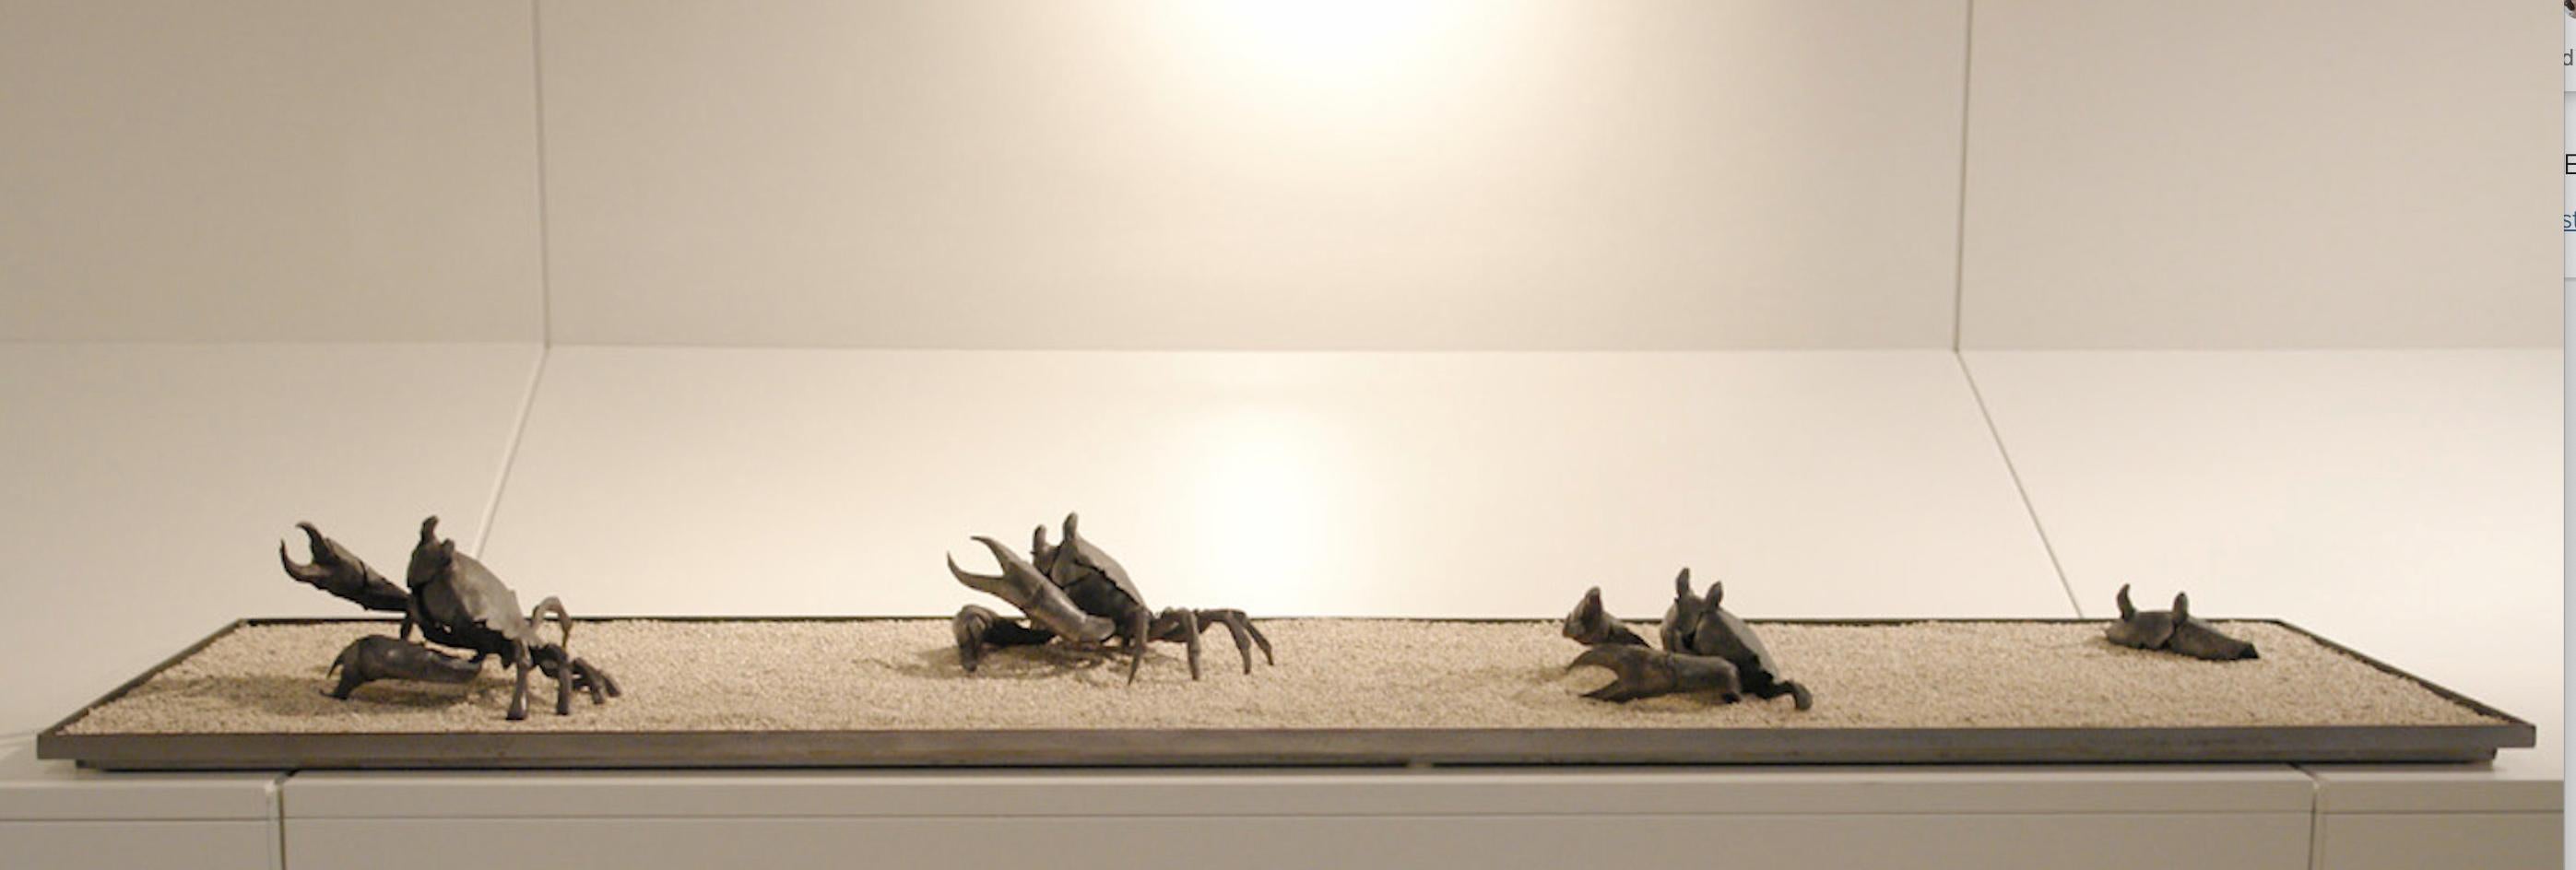 The march of the crabs, series of wrought-iron sculptures by Italian blacksmith For Sale 3